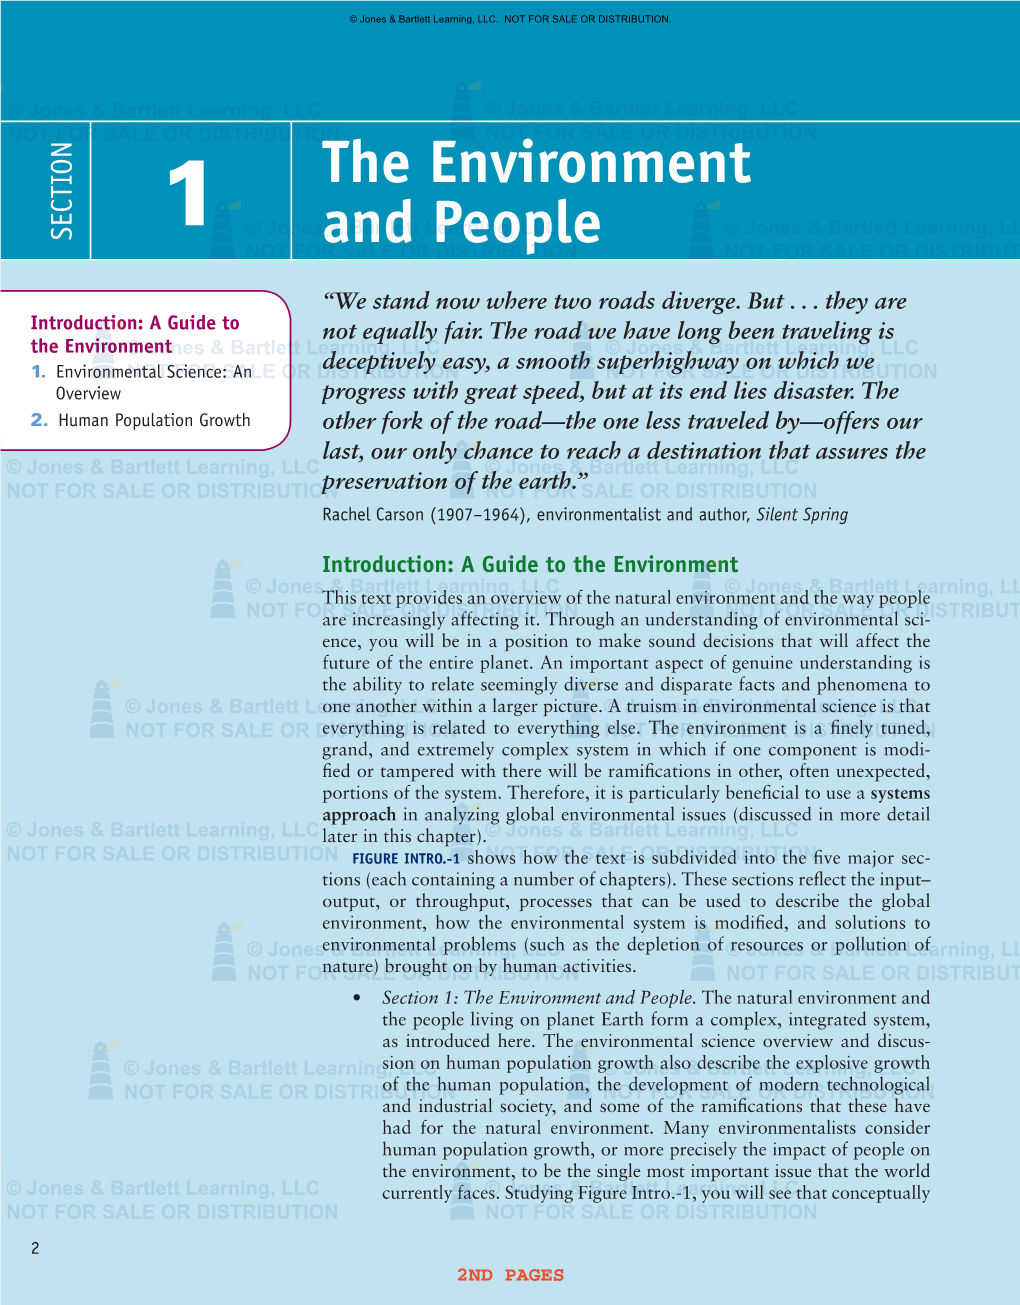 The Environment and People